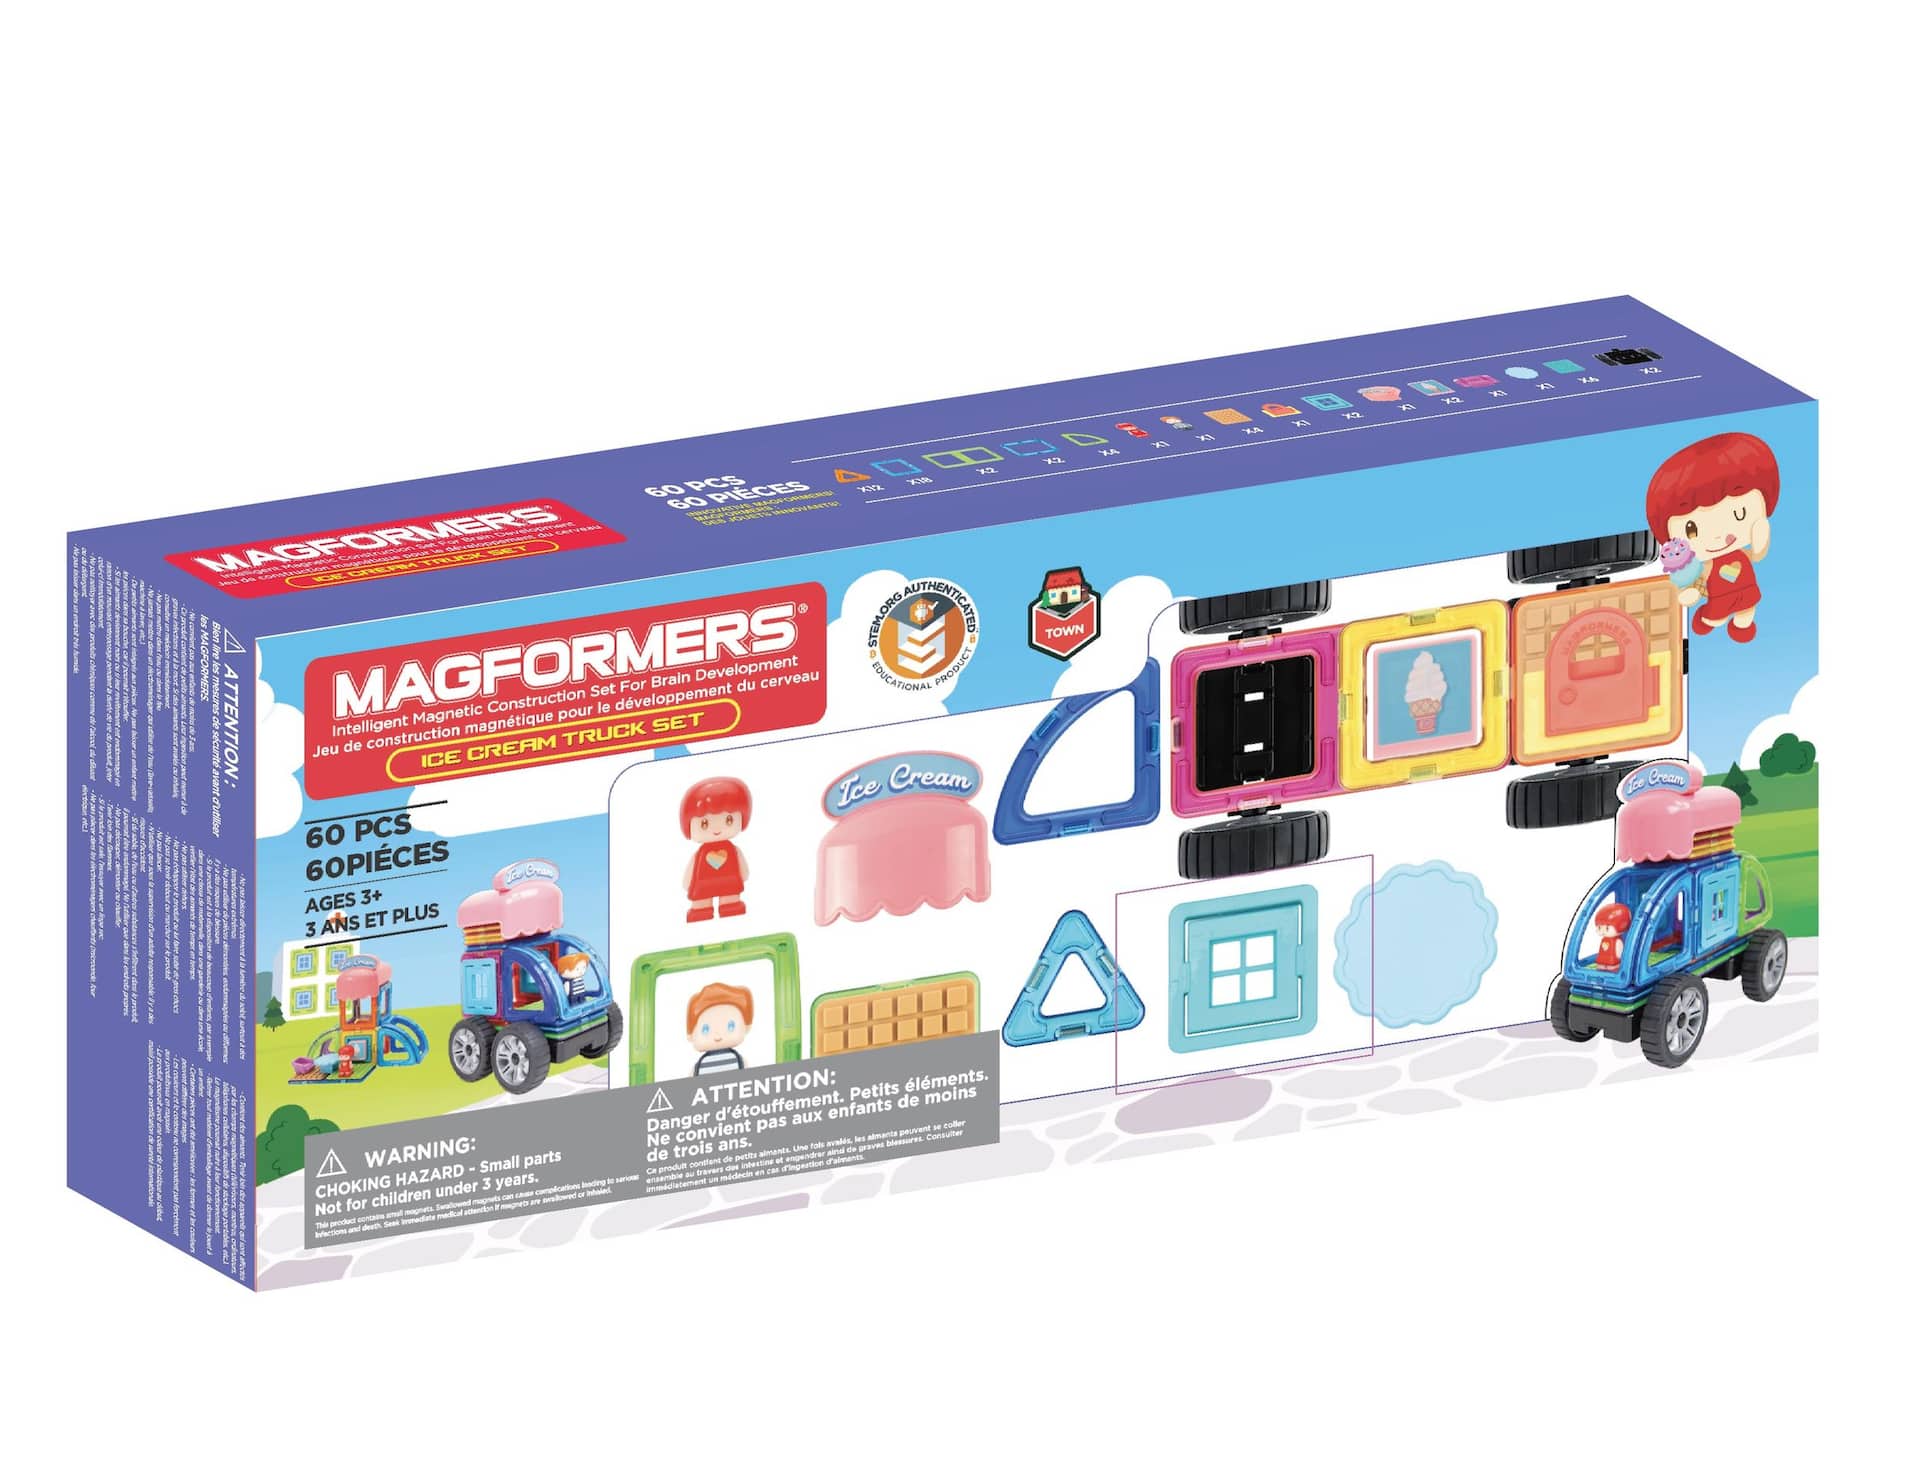 Magformers Ice Cream Truck Magnetic Construction Set, 60-pc, 60 pcs, Age 6+